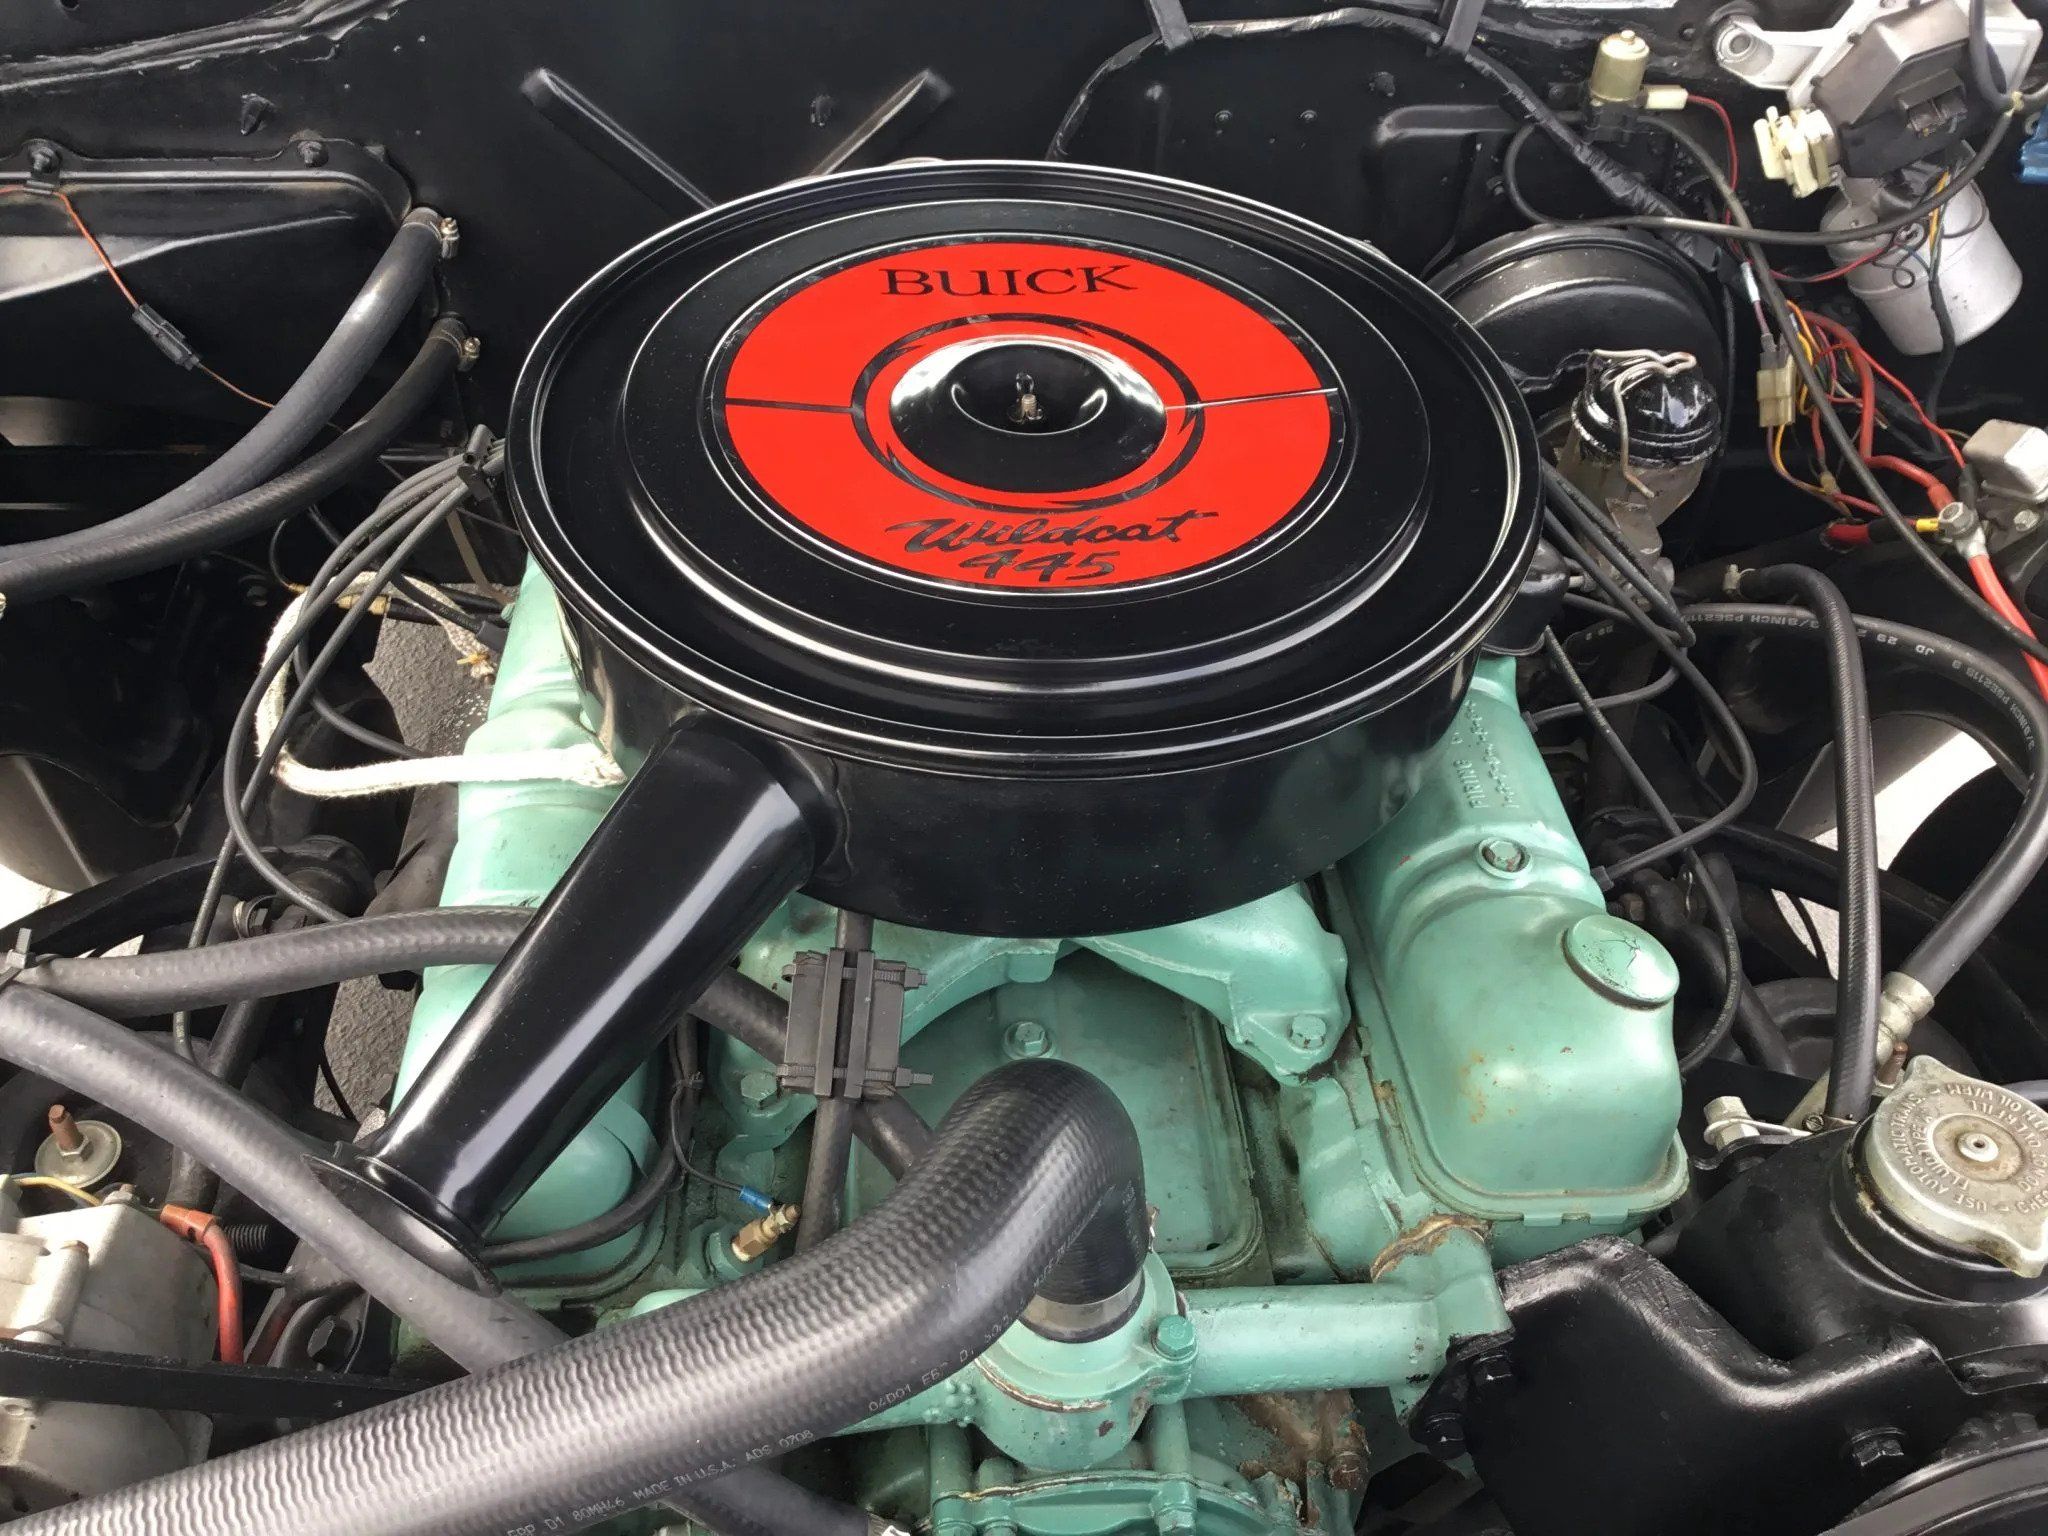 Shot of Buick Nailhead V8 under the hood of a Wildcat 445